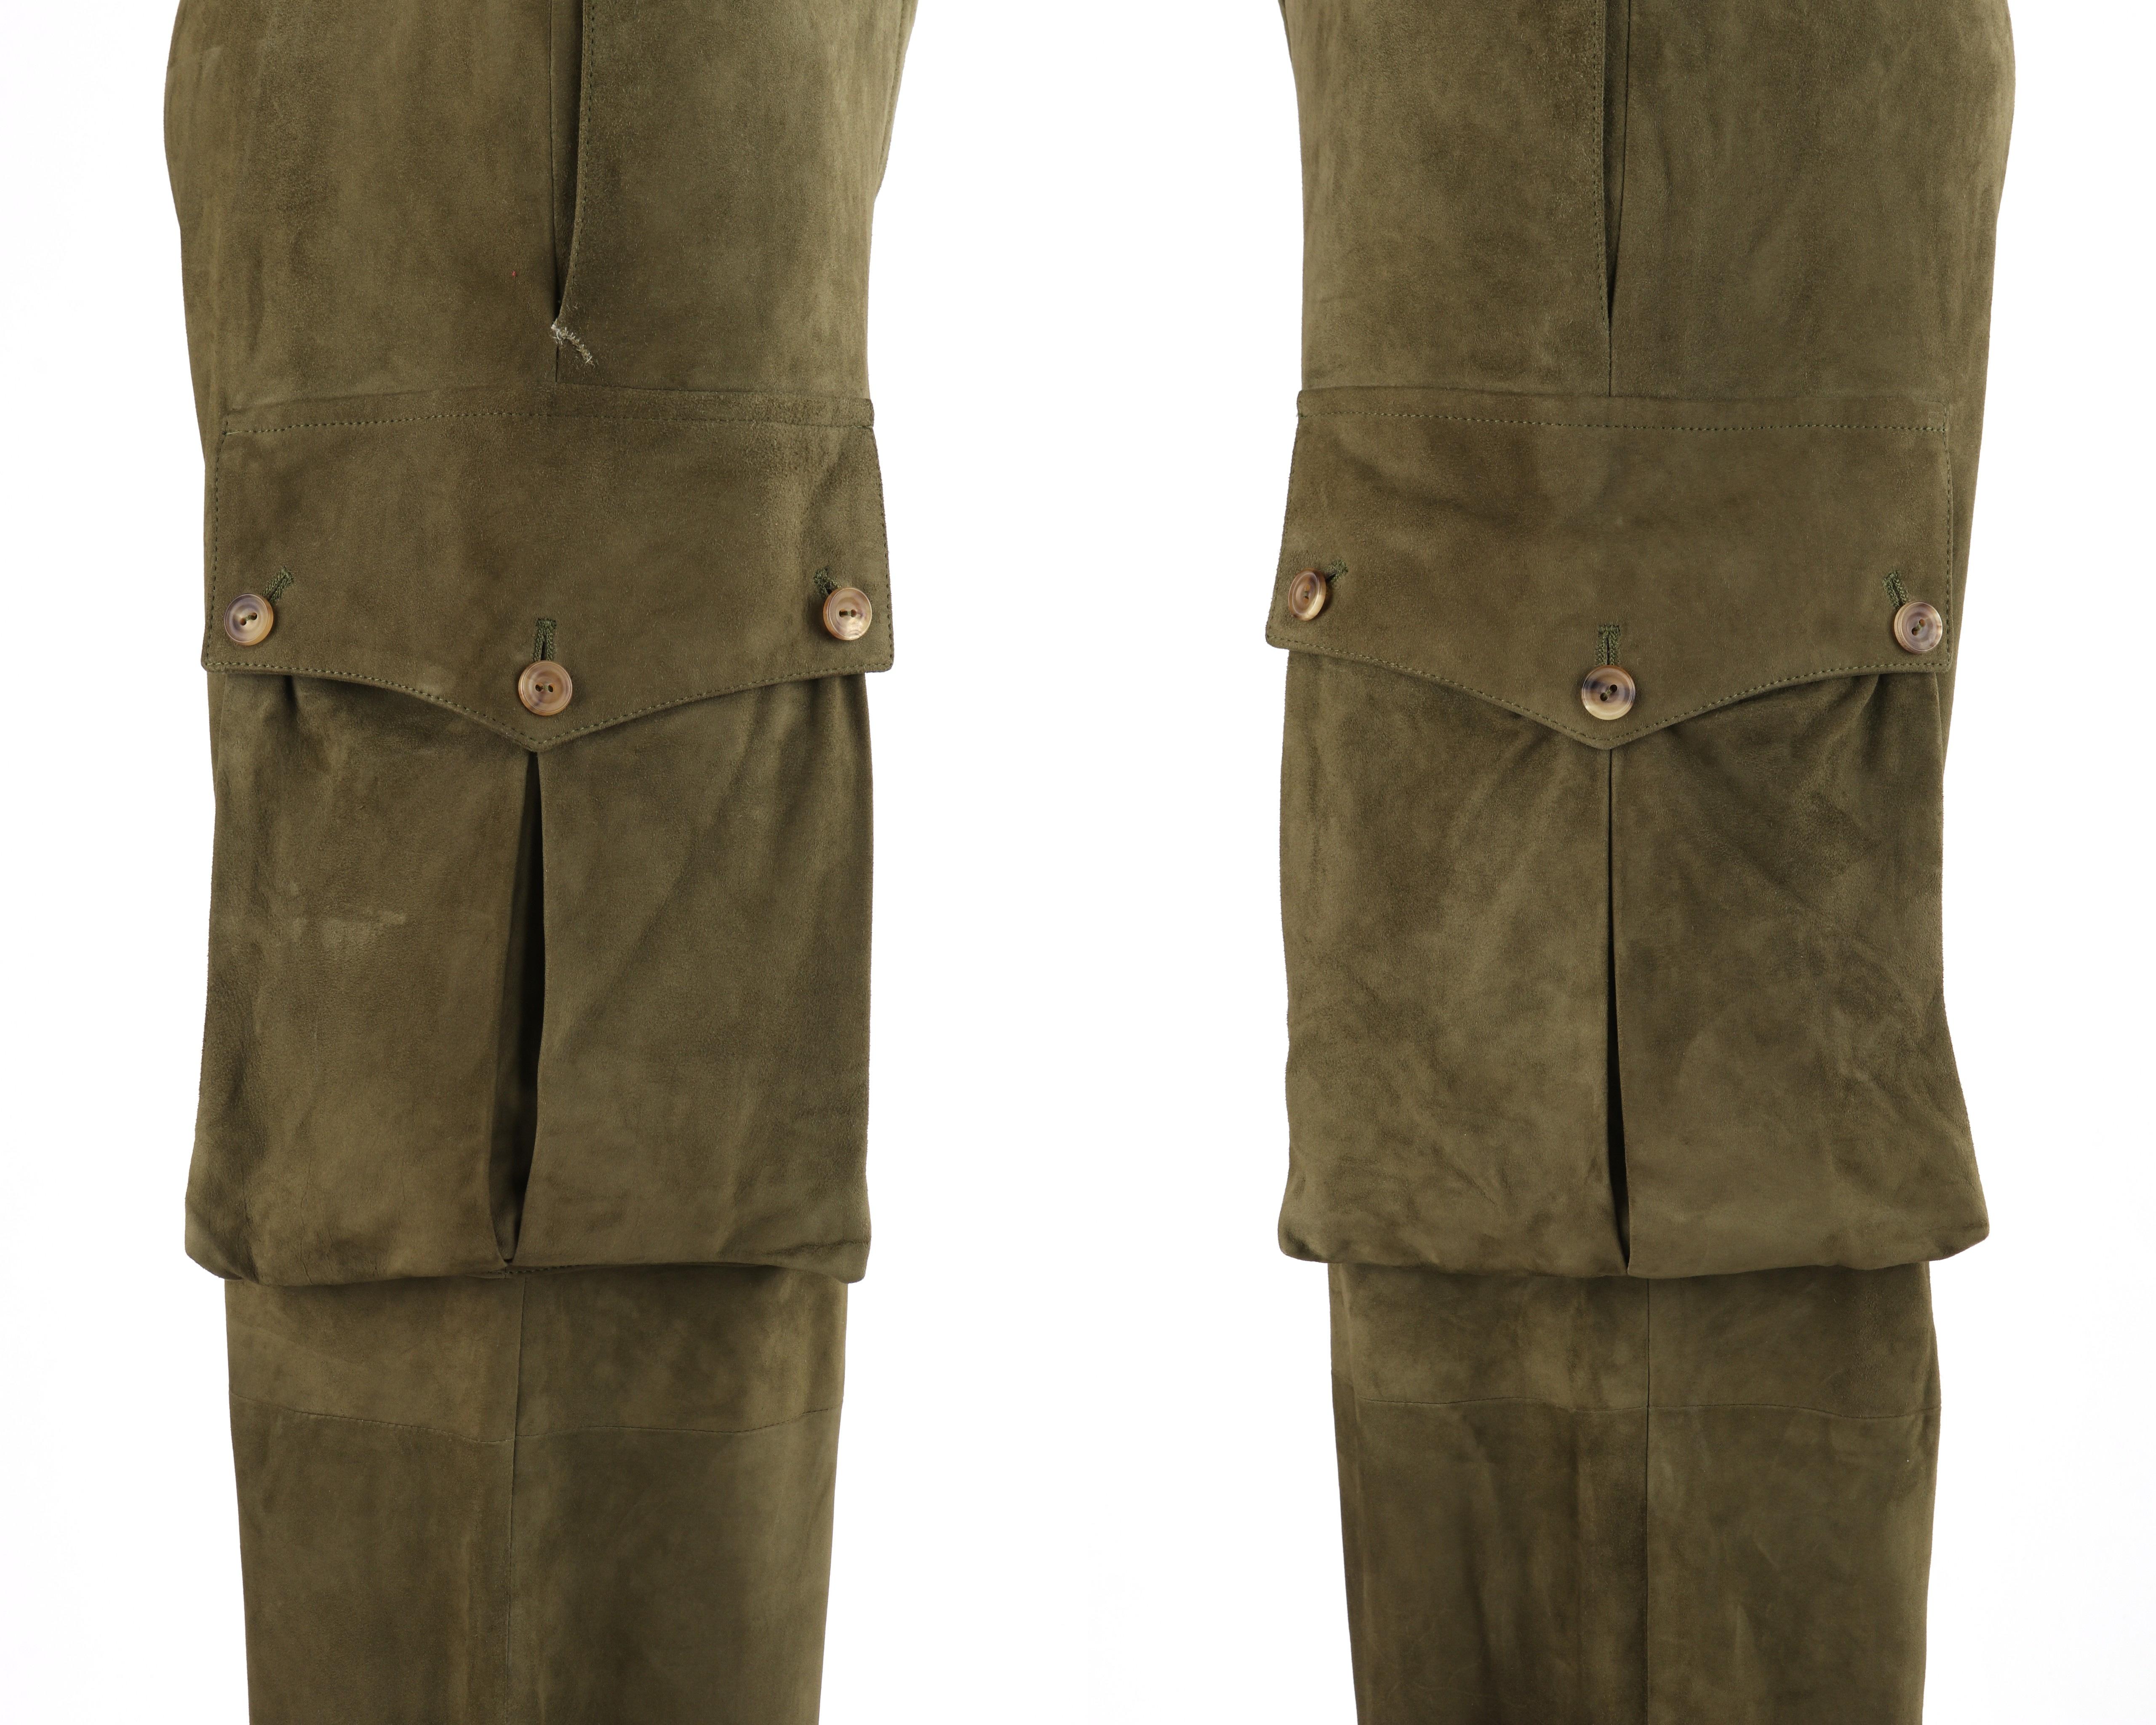 Black ALEXANDER McQUEEN A/W 2009 Army Green Suede Leather Cargo Pant Fold Over Joggers For Sale